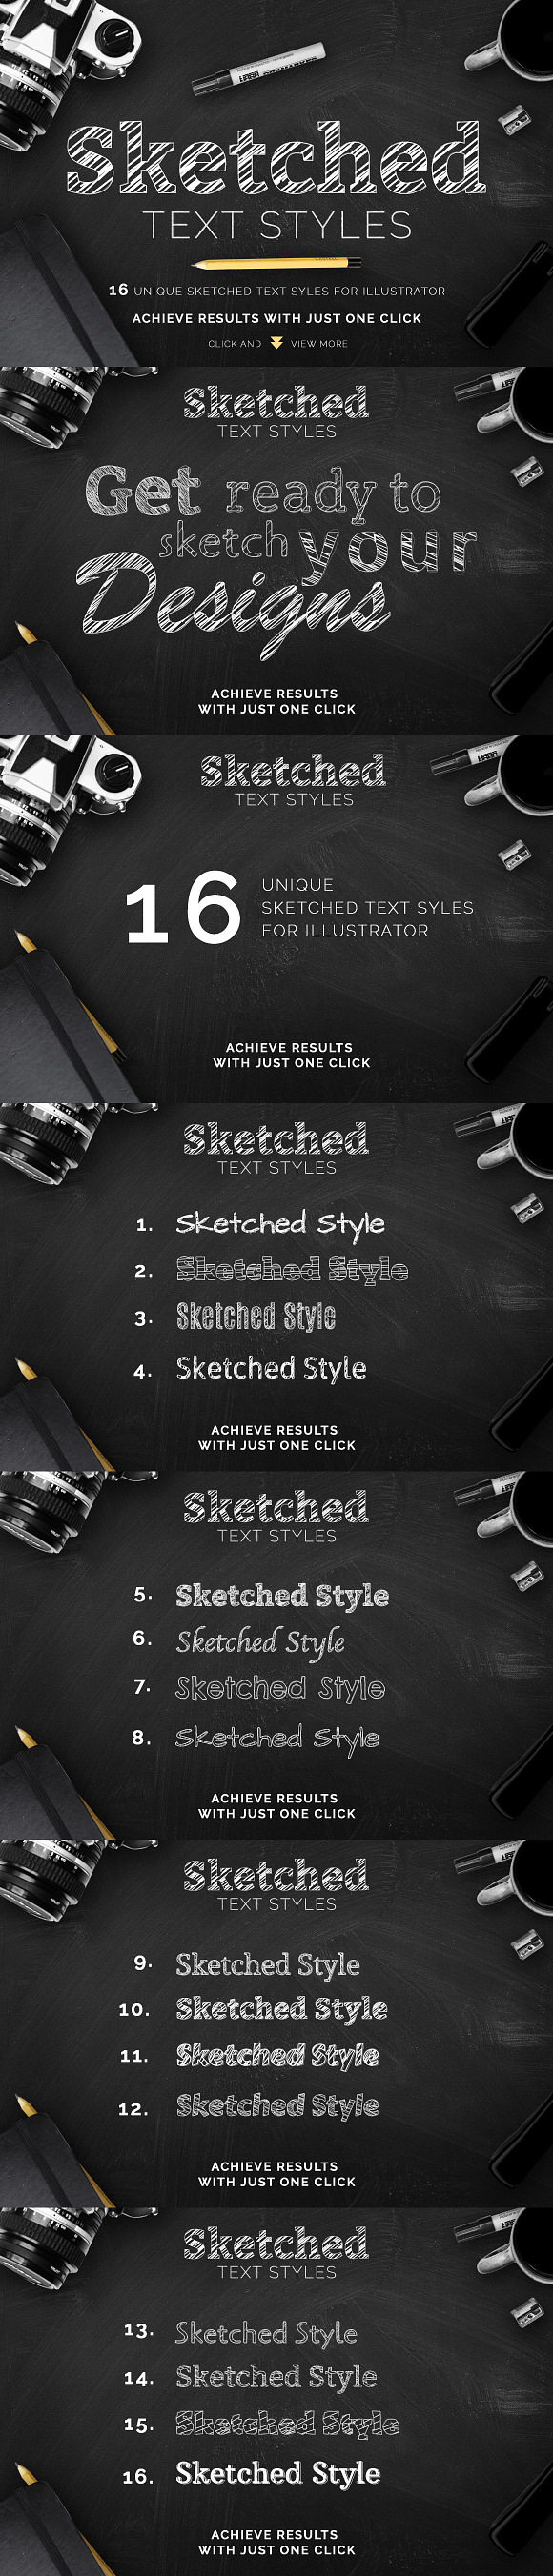 Sketched Text Styles Chalkboard Efx in Photoshop Layer Styles - product preview 4